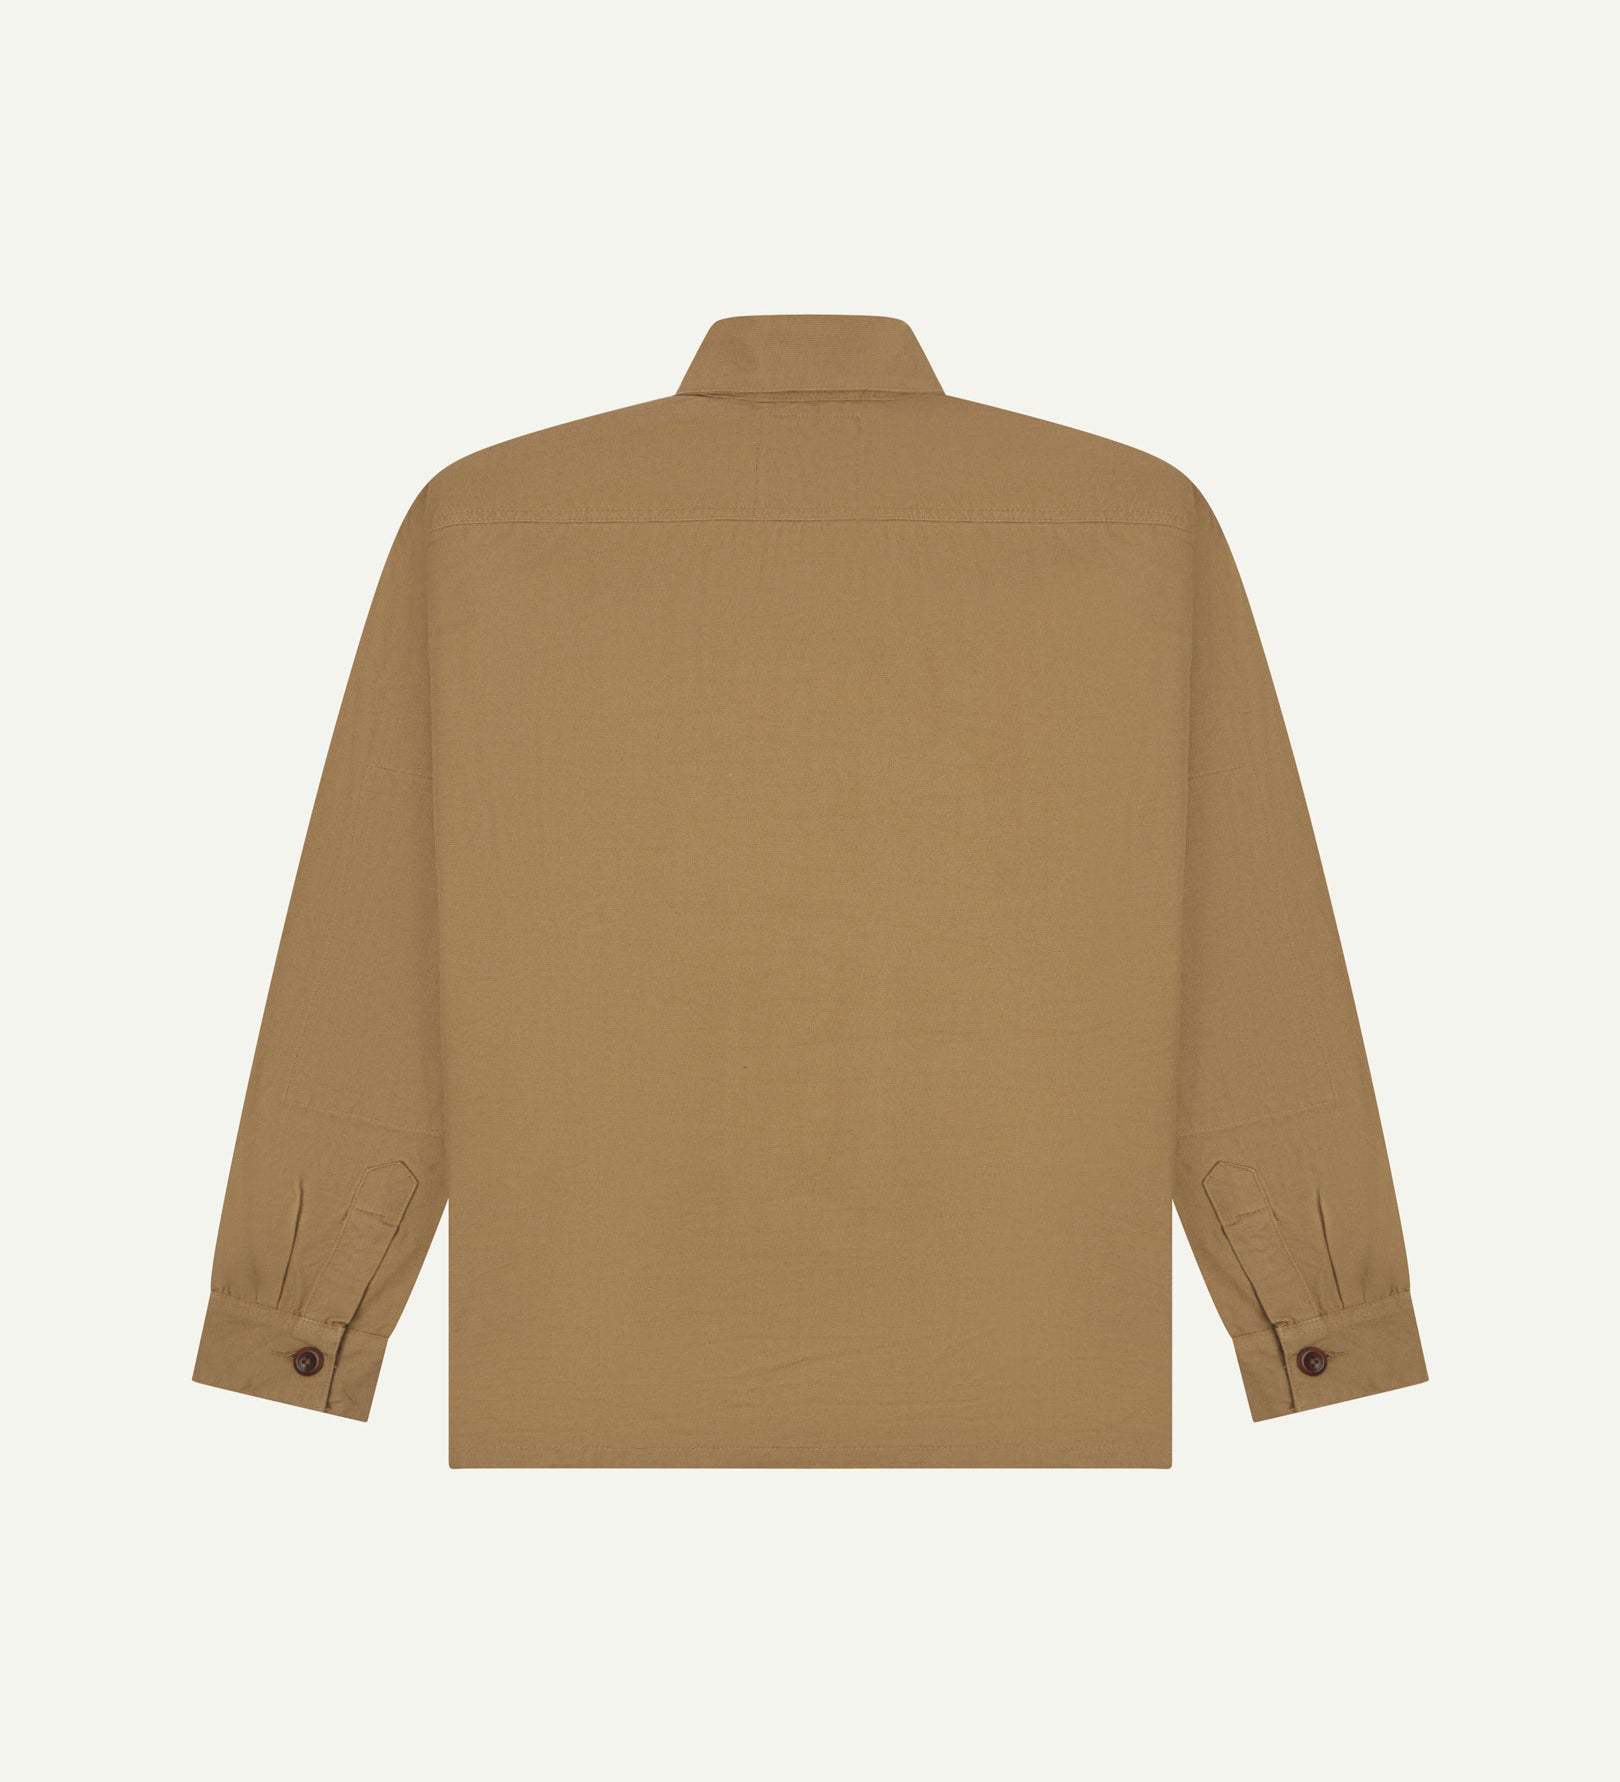 Reverse of khaki buttoned organic cotton workshirt from Uskees showing reinforced elbows, tailored cuffs and boxy silhouette.